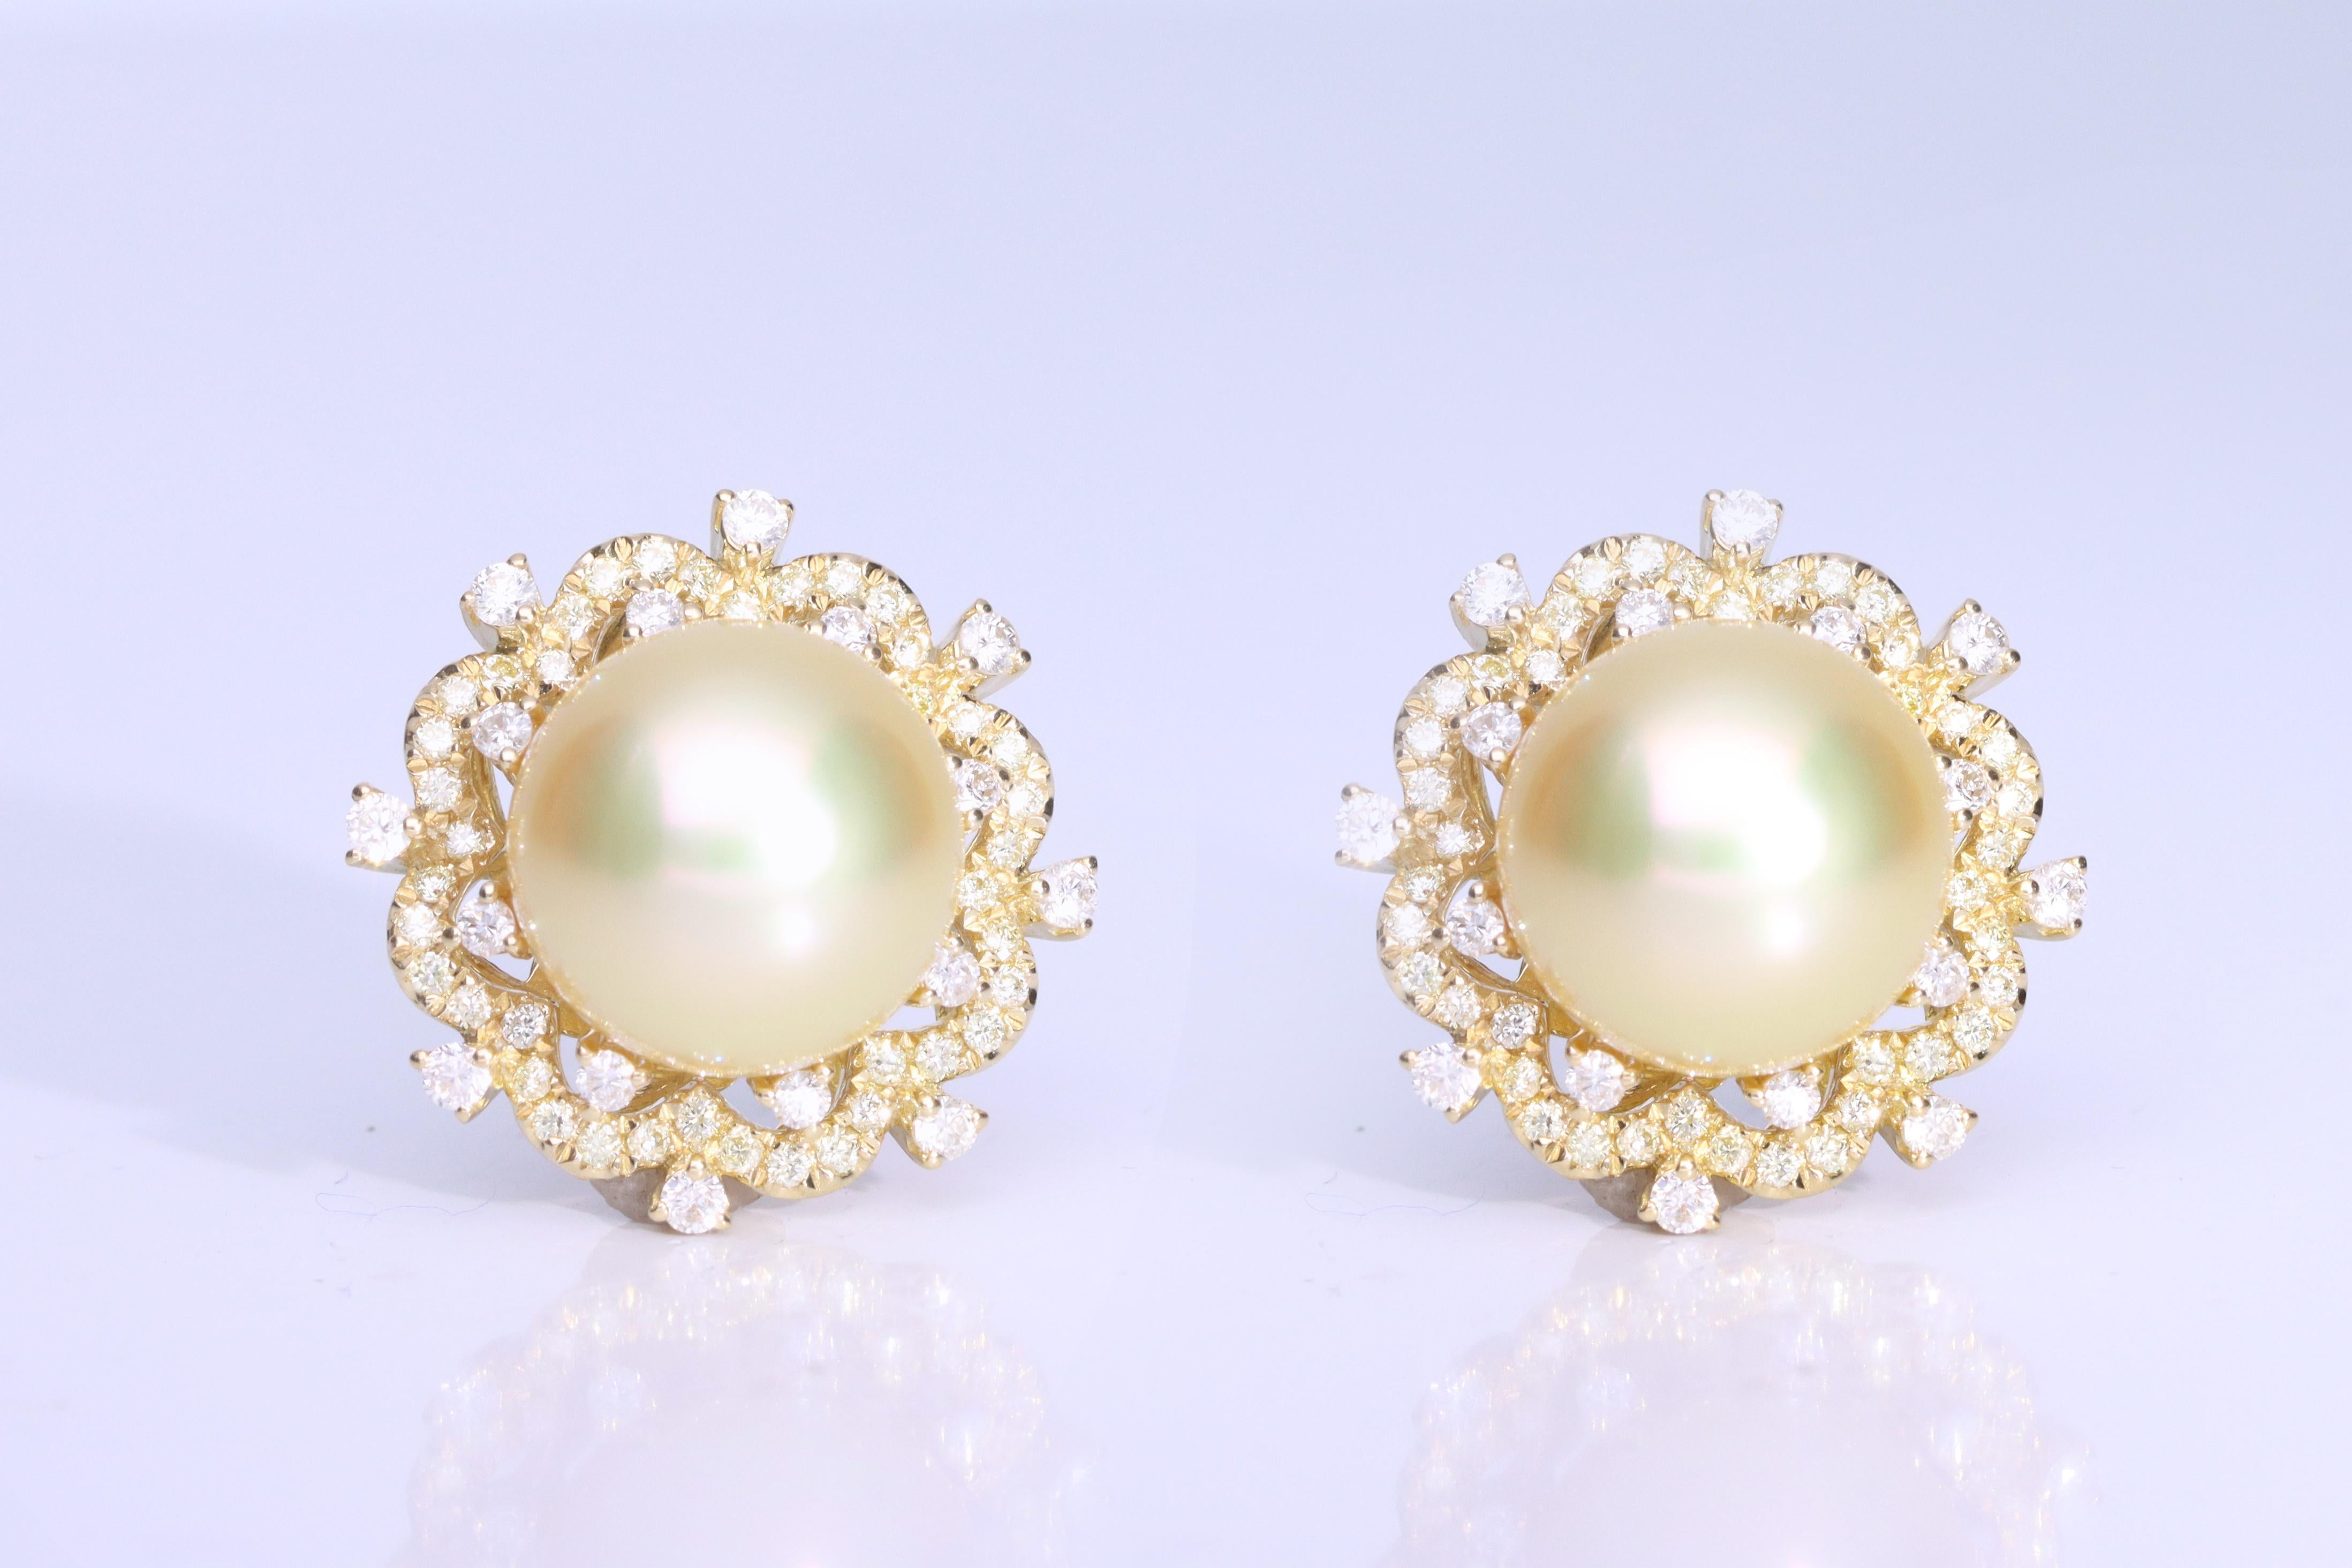 Stunning, timeless and classy eternity Unique Earring. Decorate yourself in luxury with this Gin & Grace Earring. This Earring is made up of Round cab Prong Setting South Sea Pearl (2 pcs) 18.69 Carat and Round-Cut Prong Setting Diamond (32 pcs)